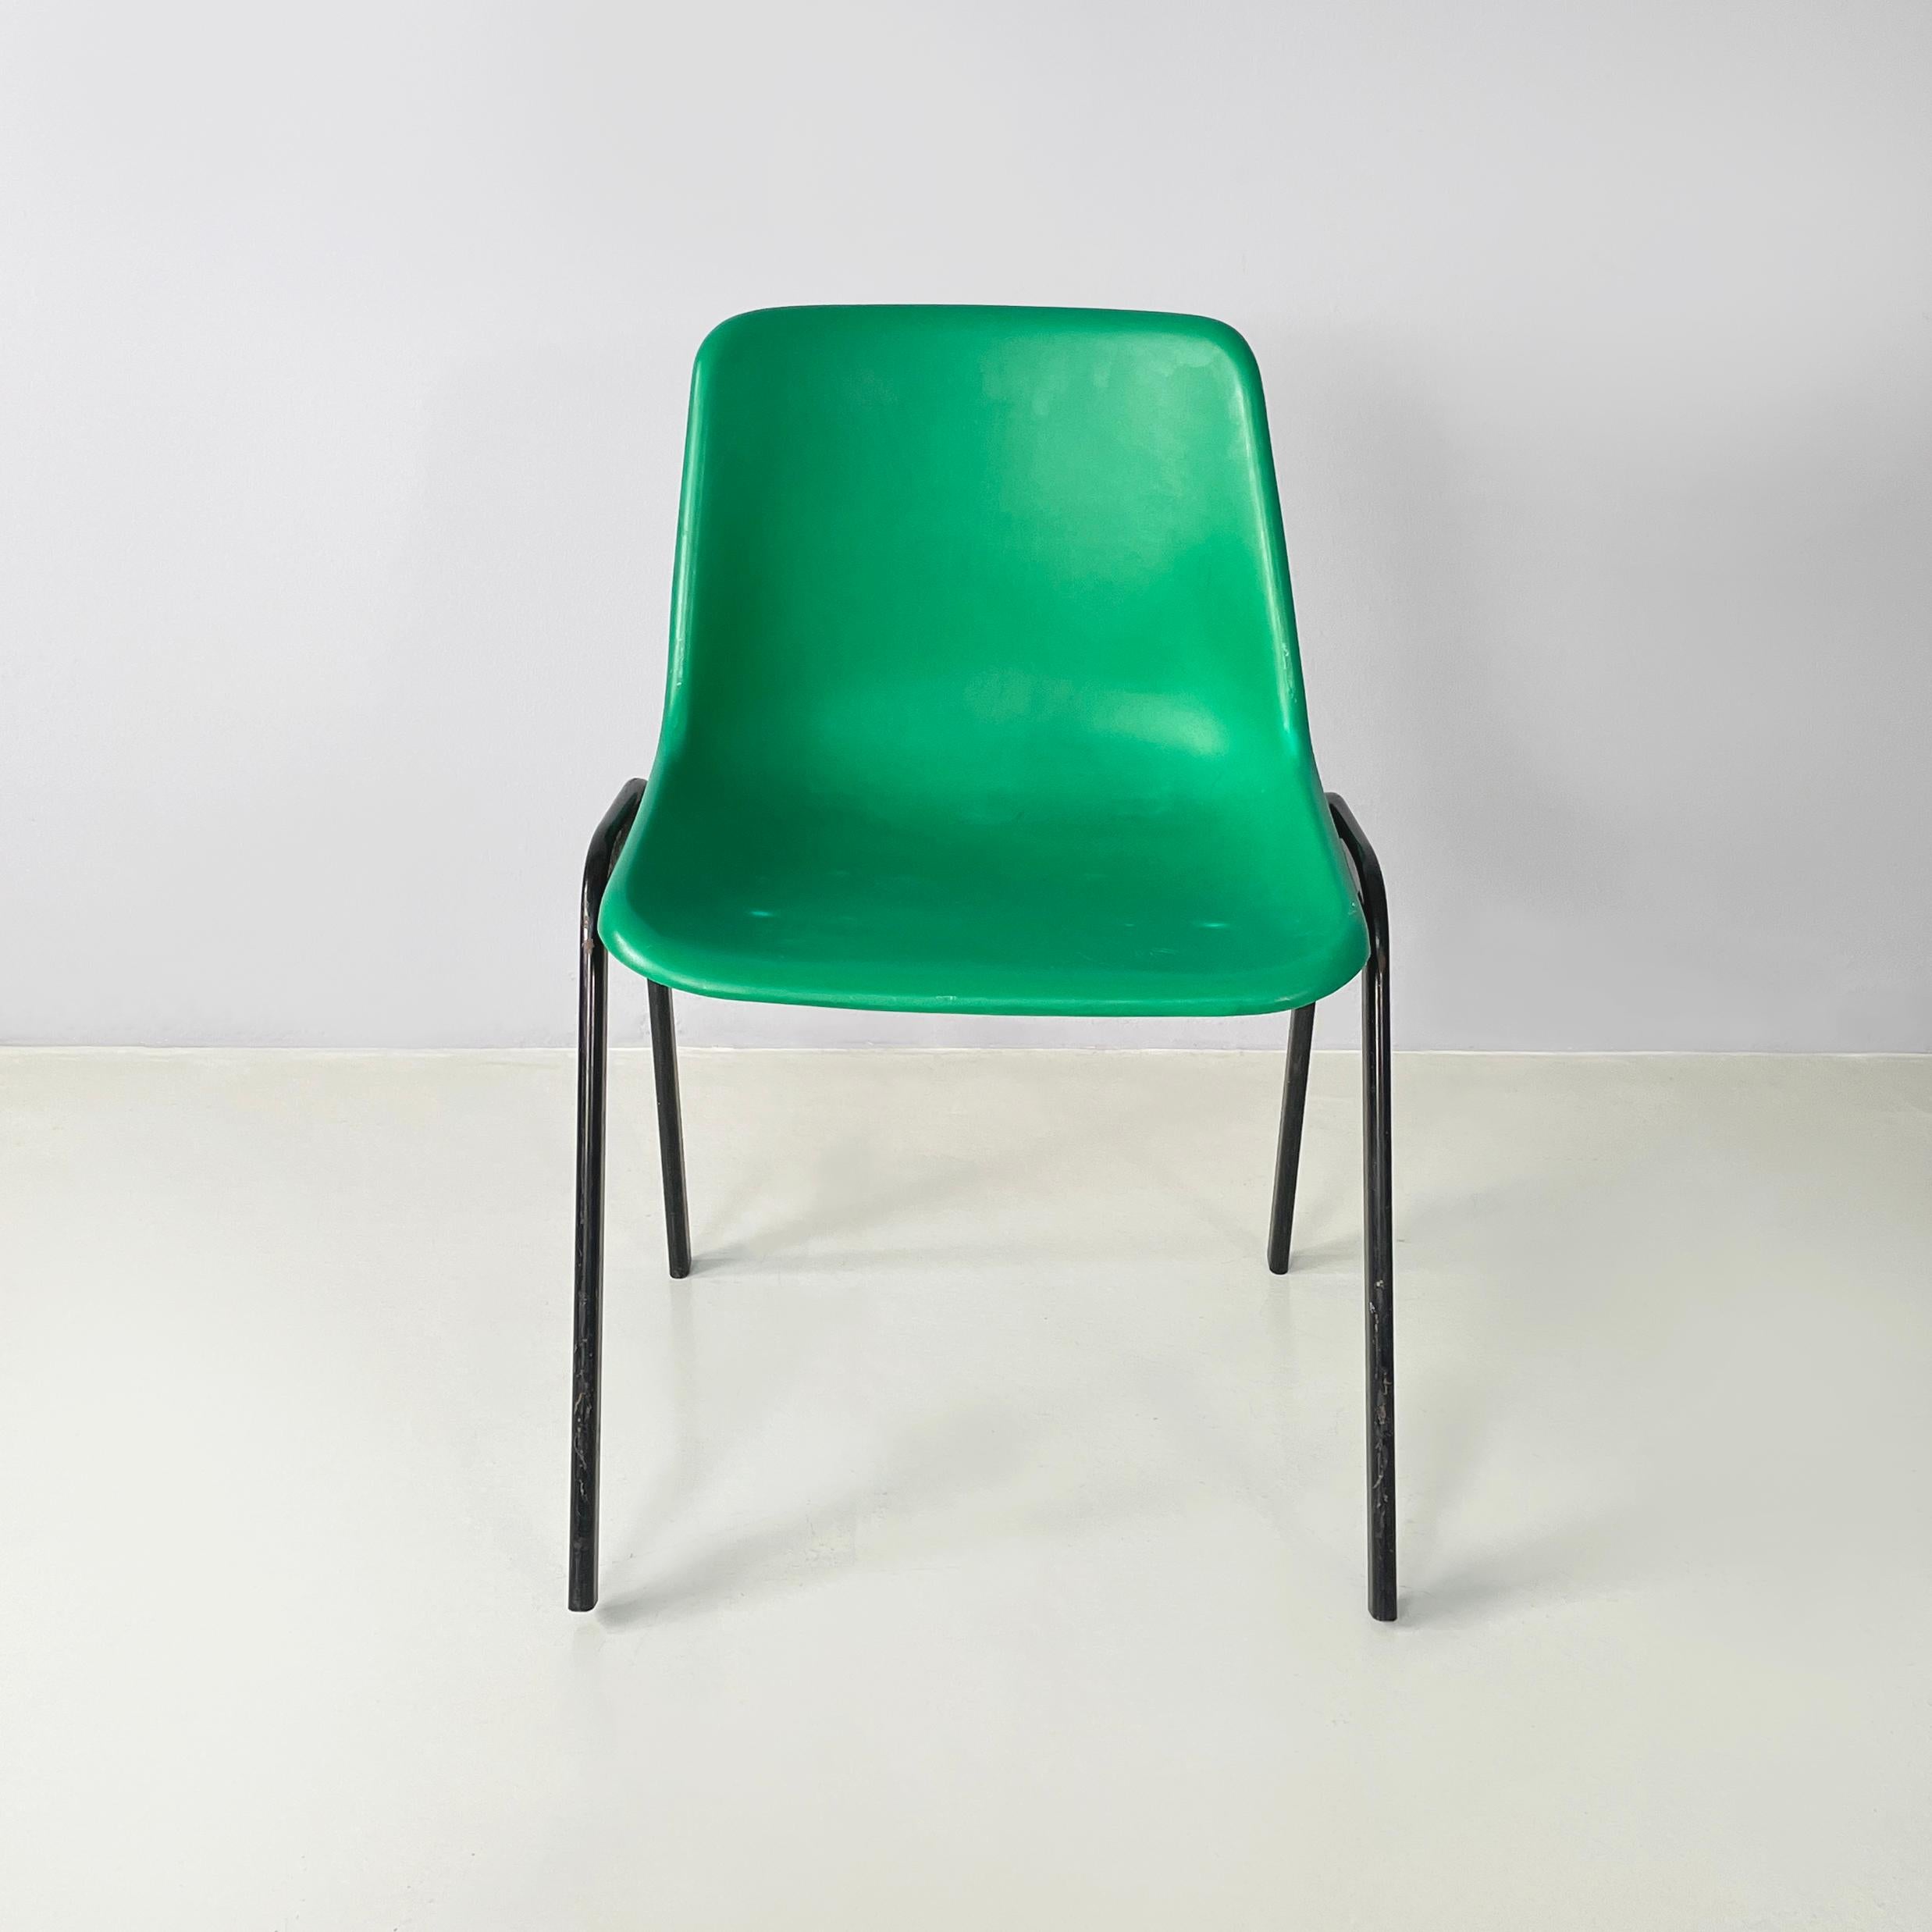 Modern Italian modern Stackable chairs in green plastic and black metal, 2000s For Sale